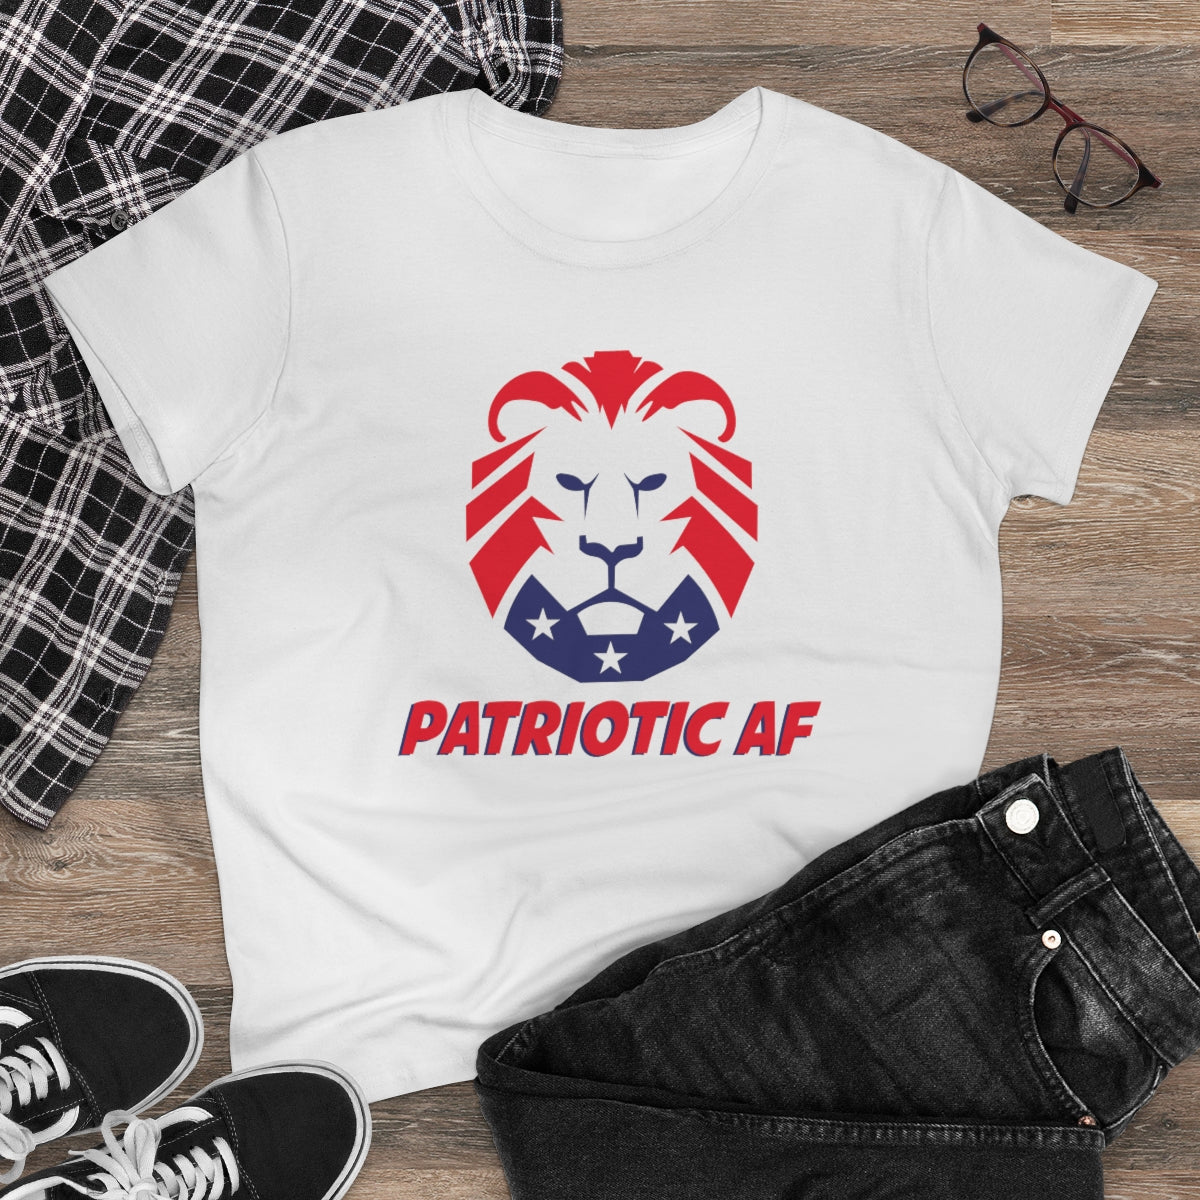 Patriotic AF with MAGA Lion | Women's Tee - Rise of The New Media